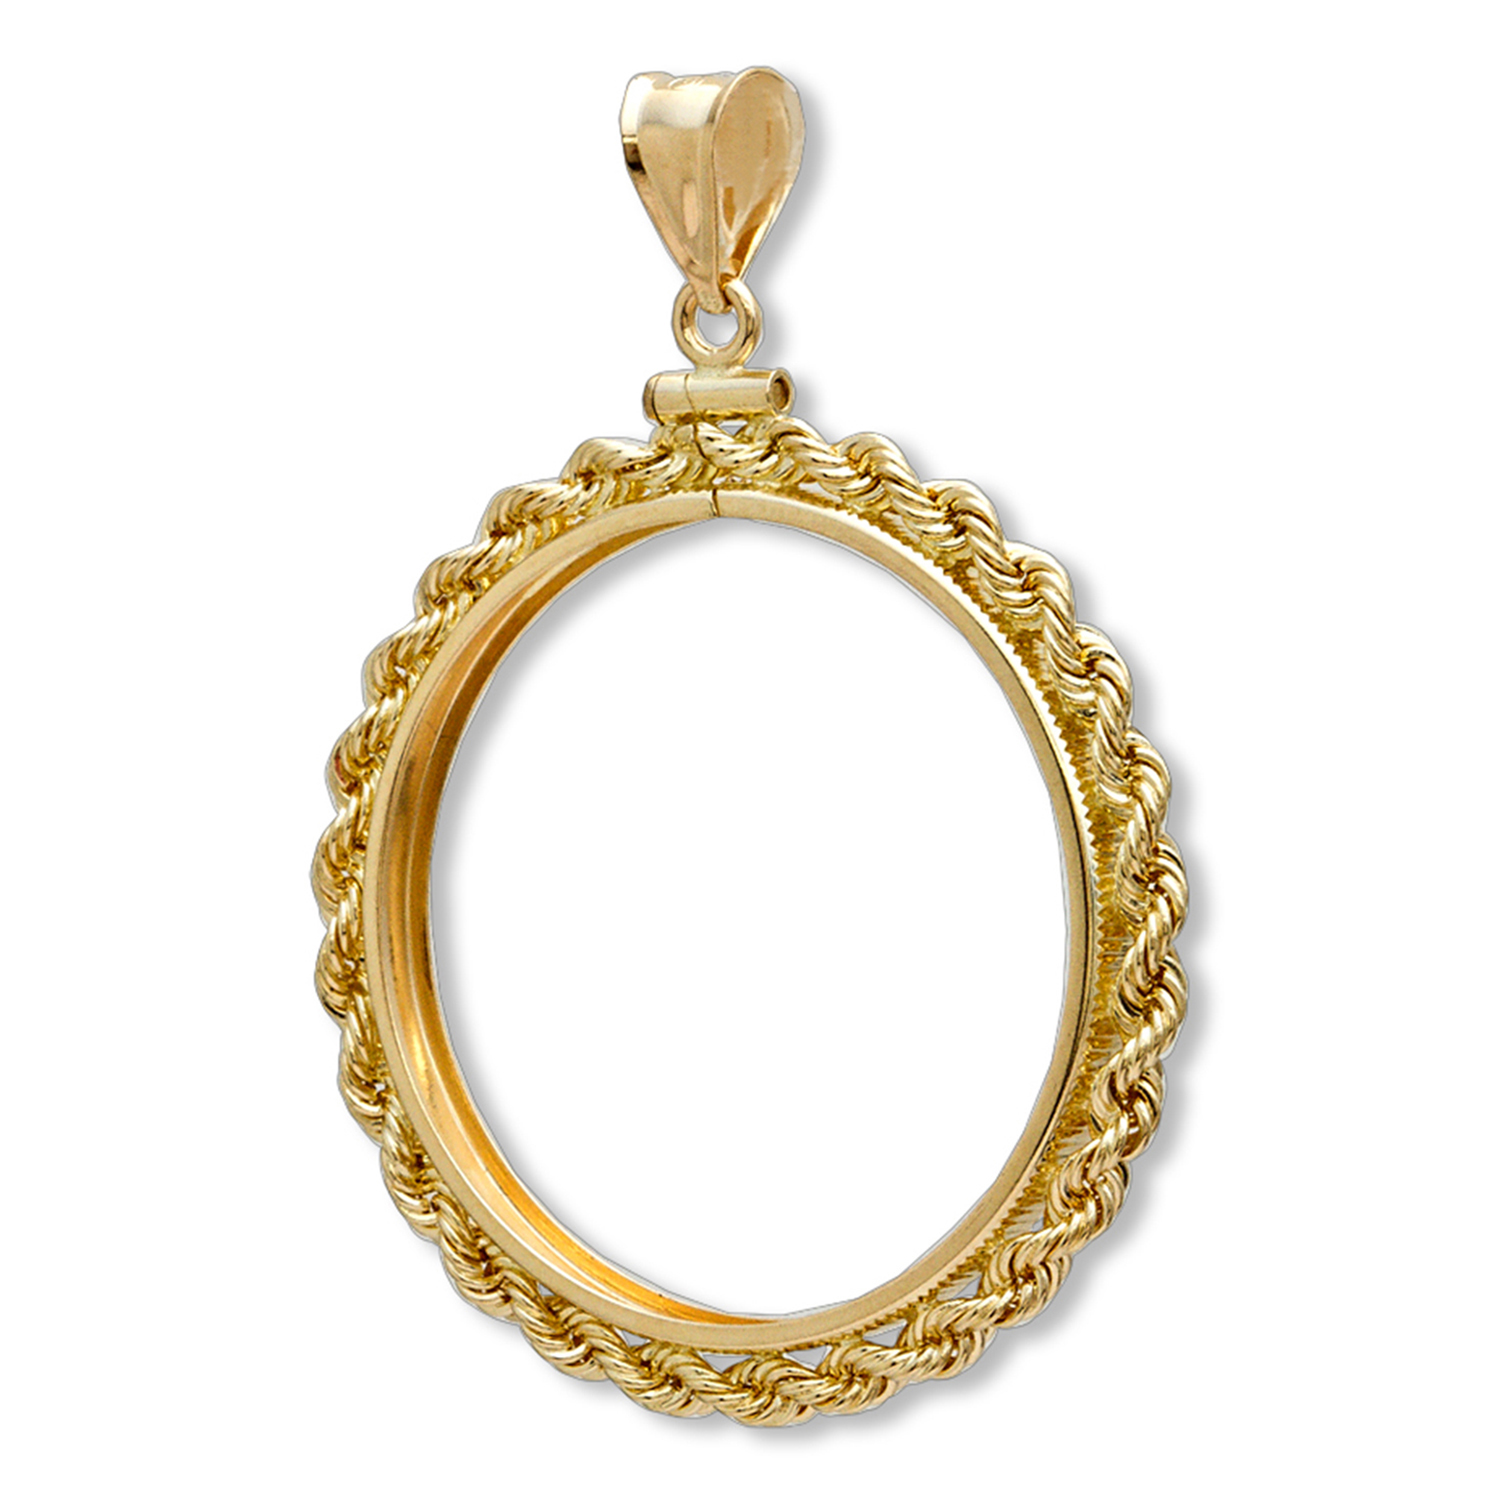 Buy 14K Gold Screw-Top Rope Polished Coin Bezel - 13 mm